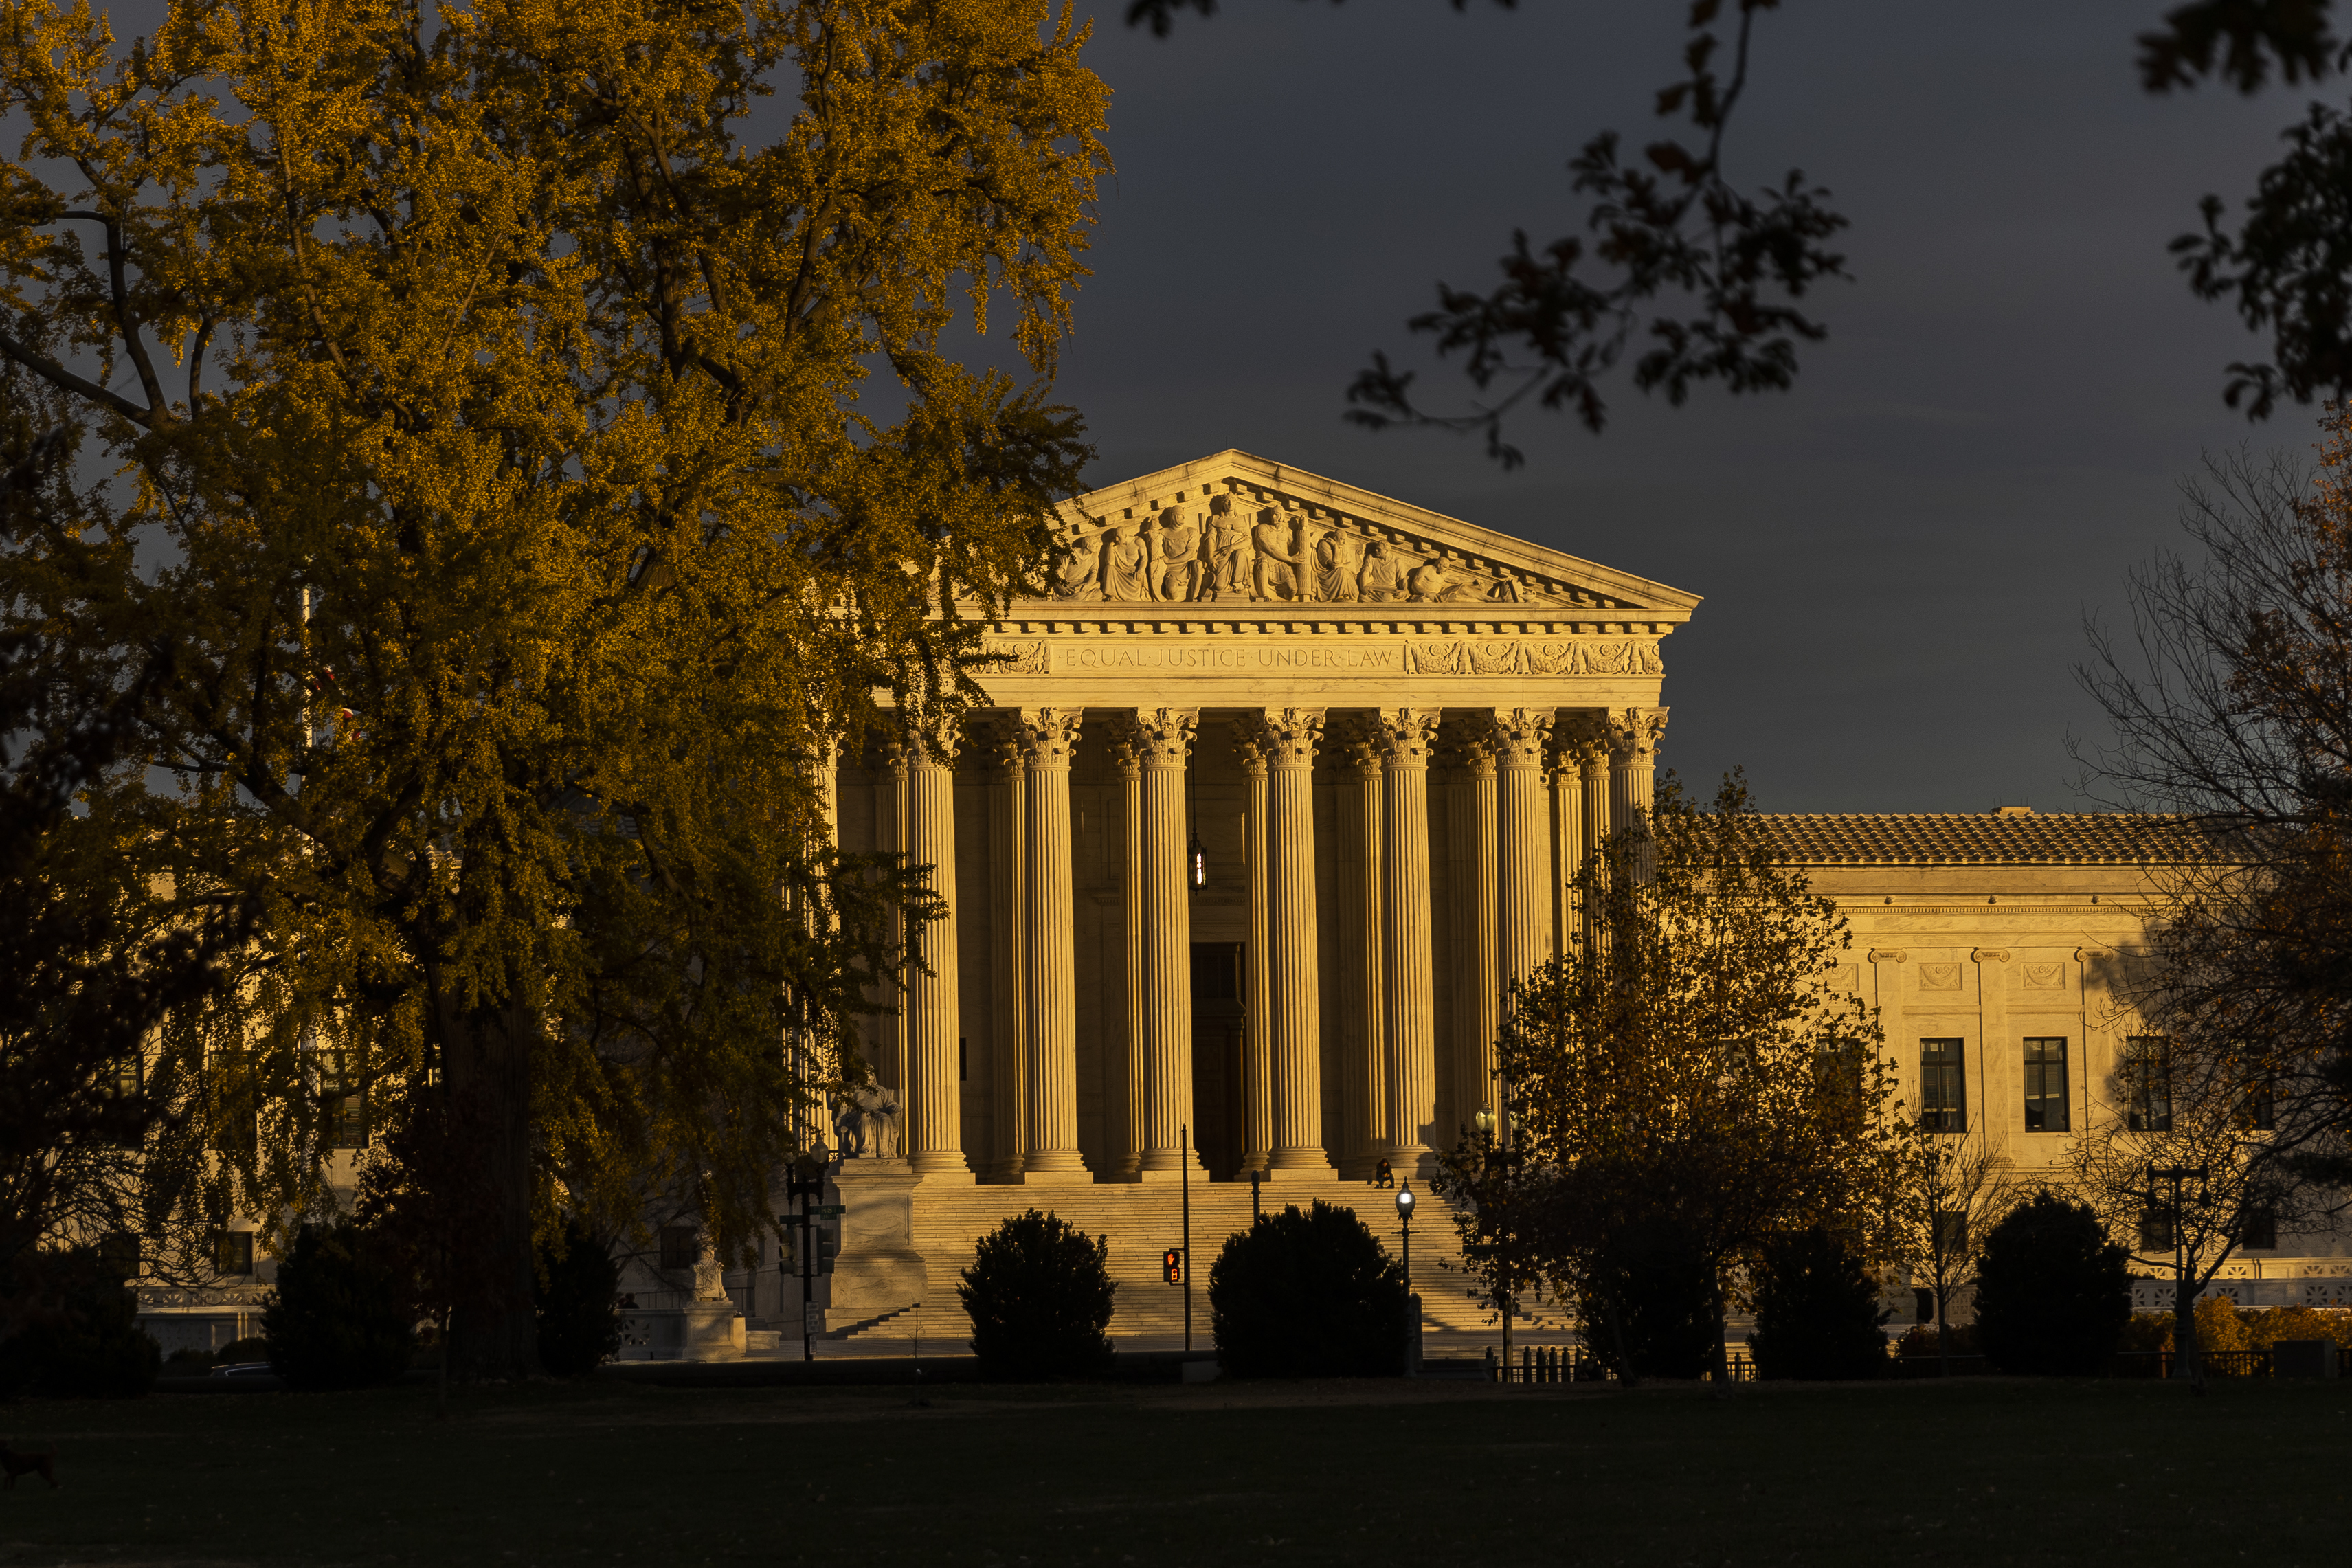 The U.S. Supreme Court building in Washington D.C. on Dec. 3, 2021. Justices are weighing a case that could allow religious schools to receive taxpayer money. (Kerem Yucel—Anadolu Agency/Getty Images)